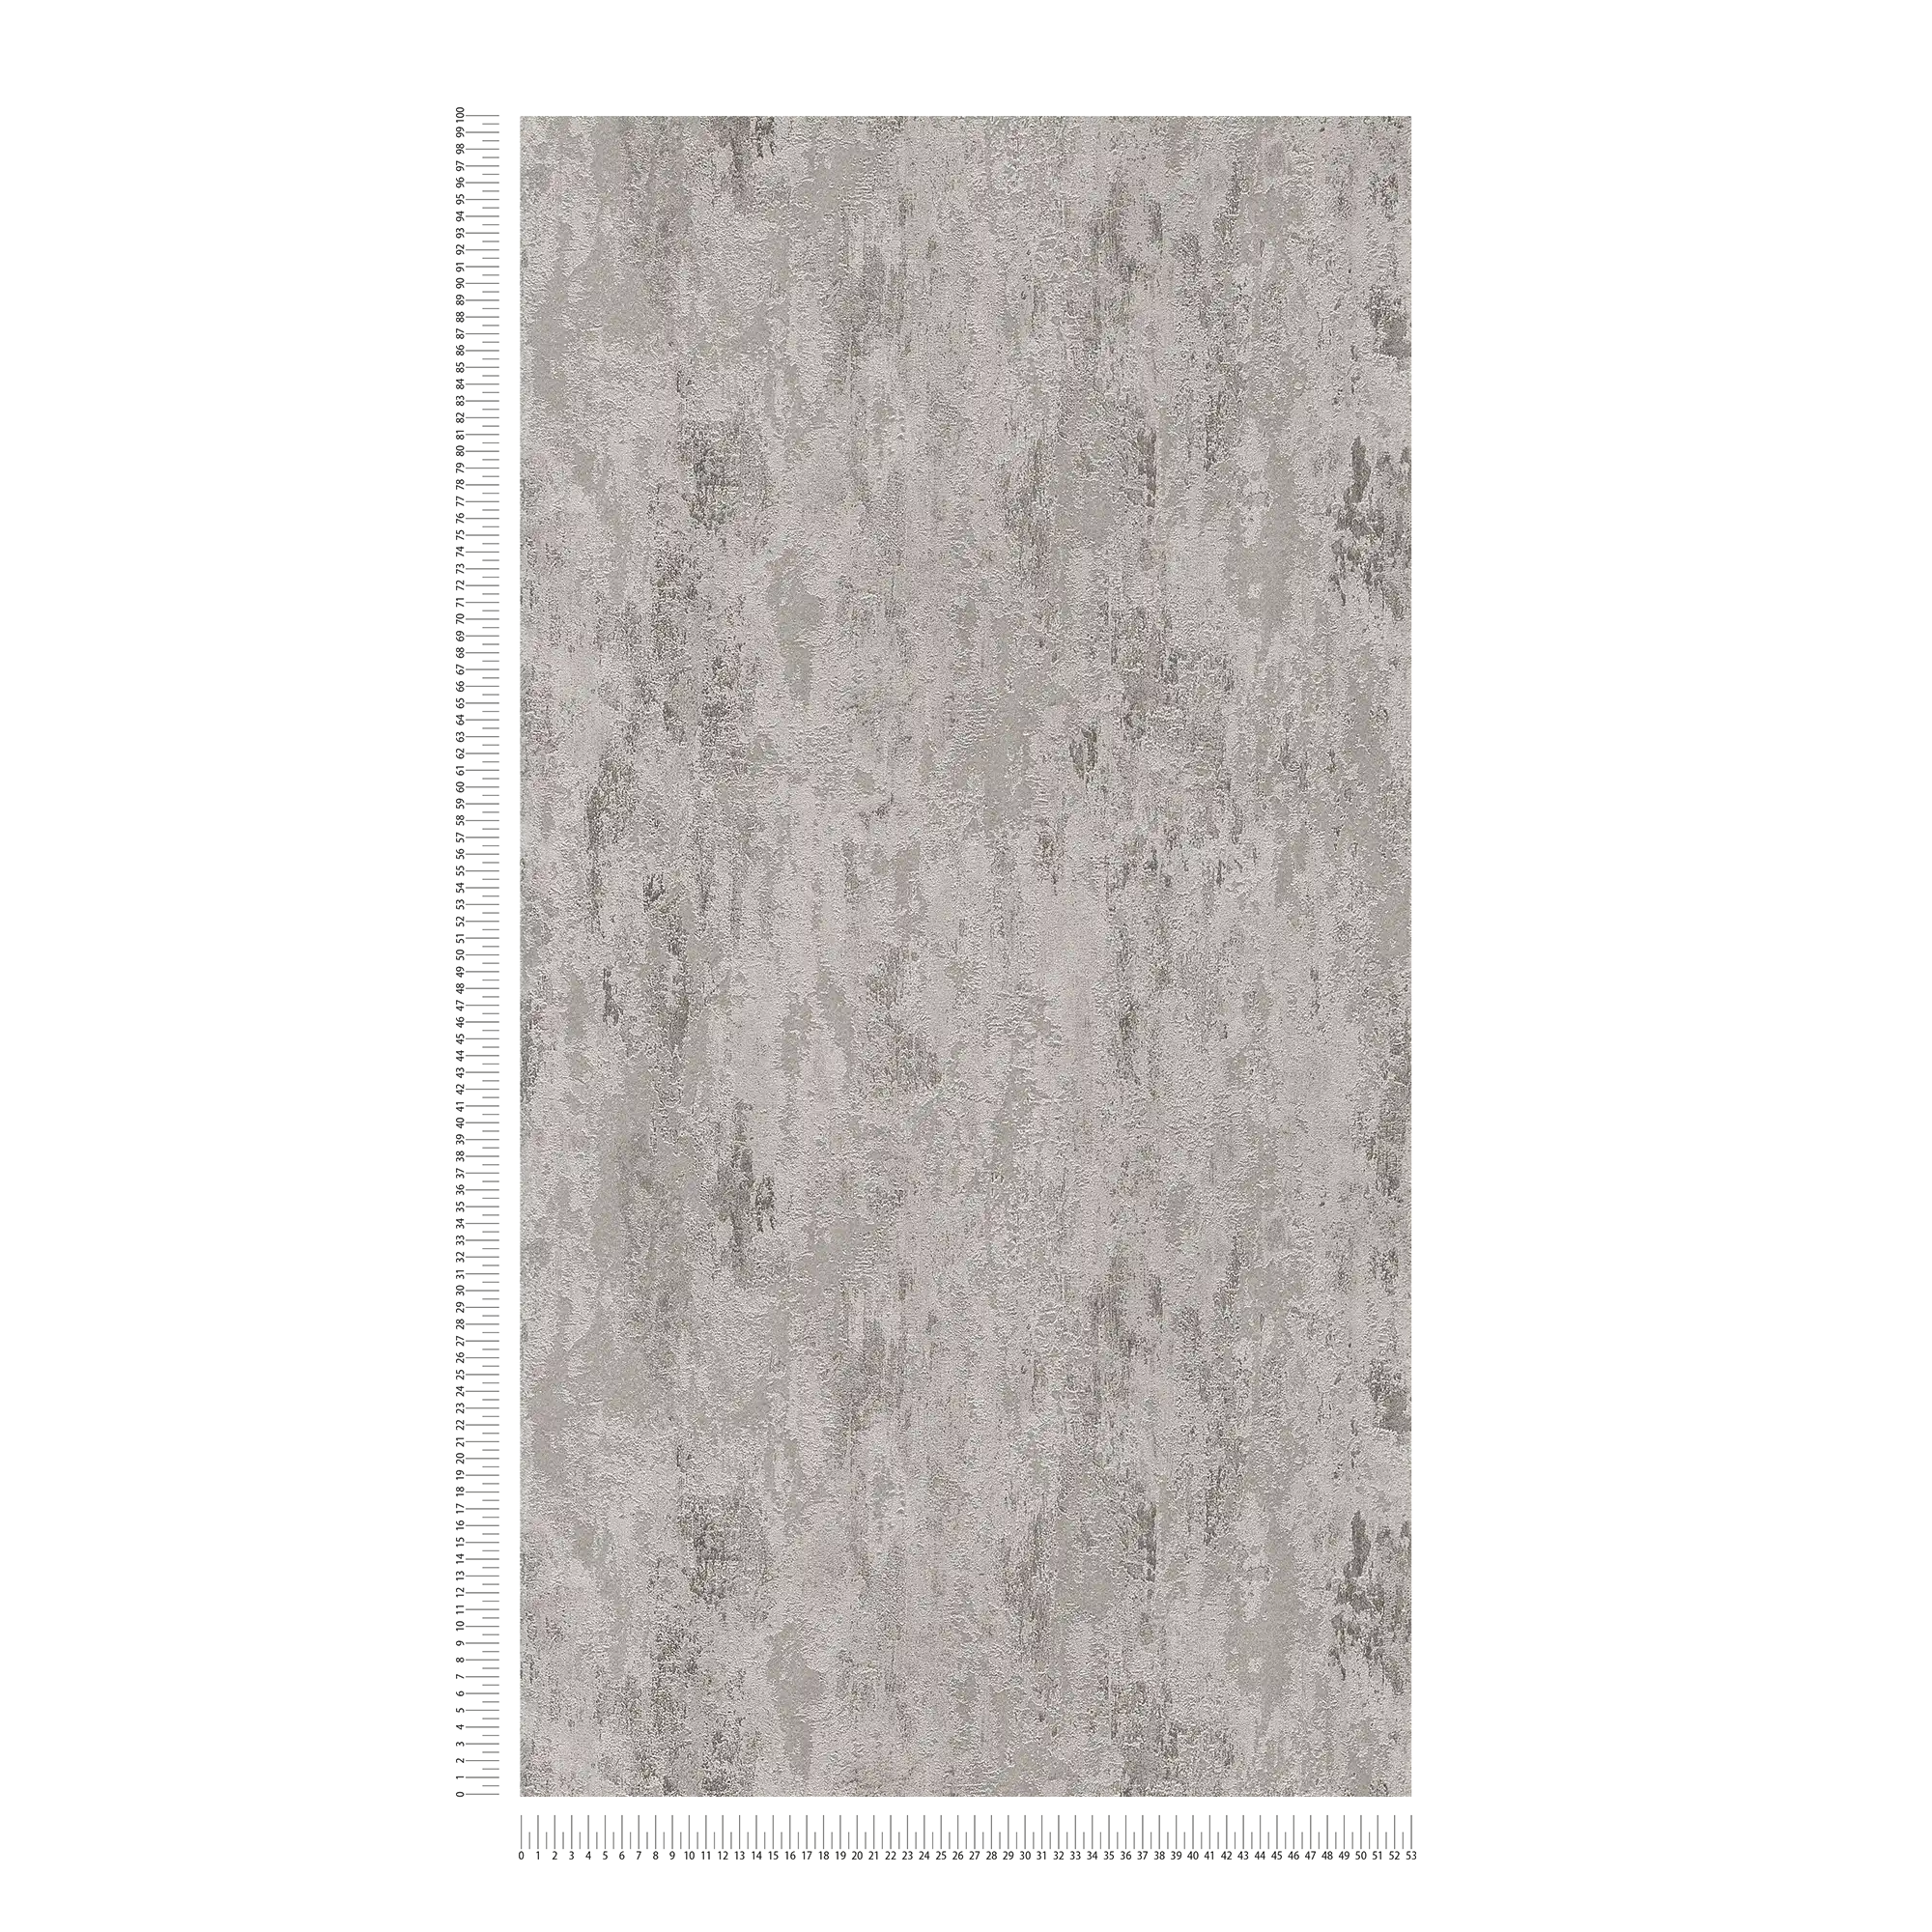             Rust non-woven wallpaper with textured pattern - grey, silver
        